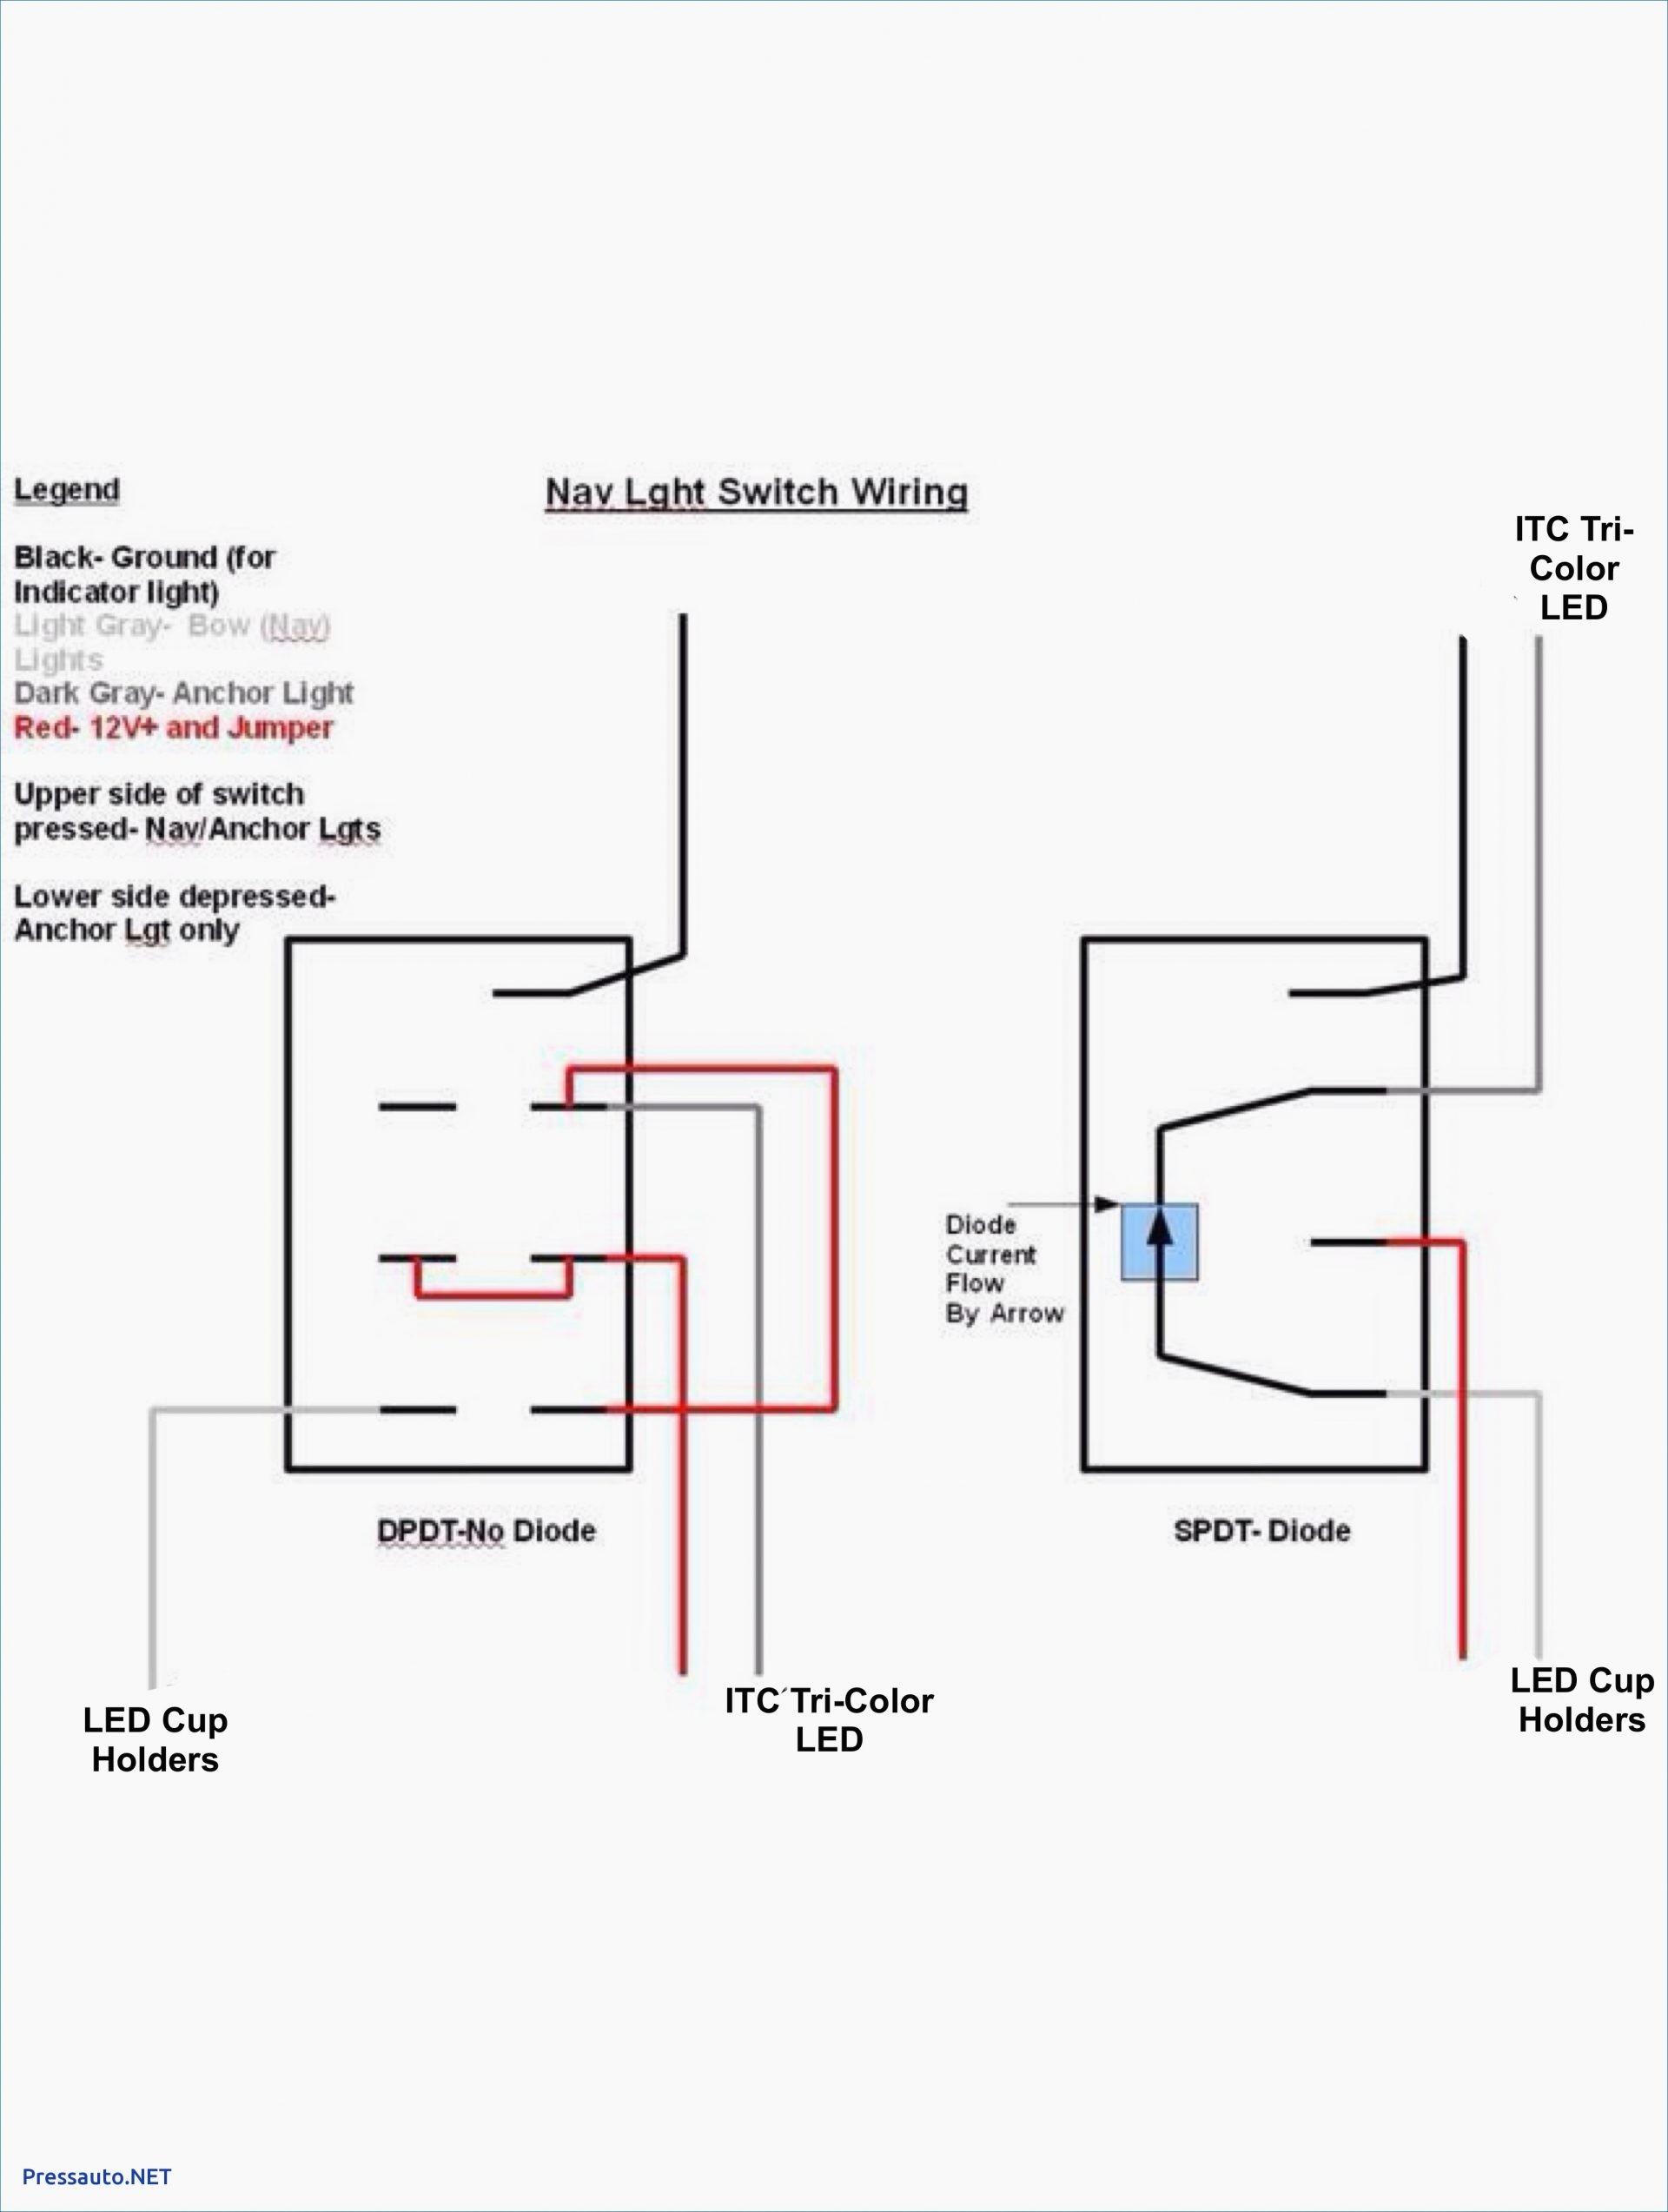 4pdt Switch Diagram Electrical Engineering Wiring Diagram 4pdt Toggle Switch Wiring Diagram